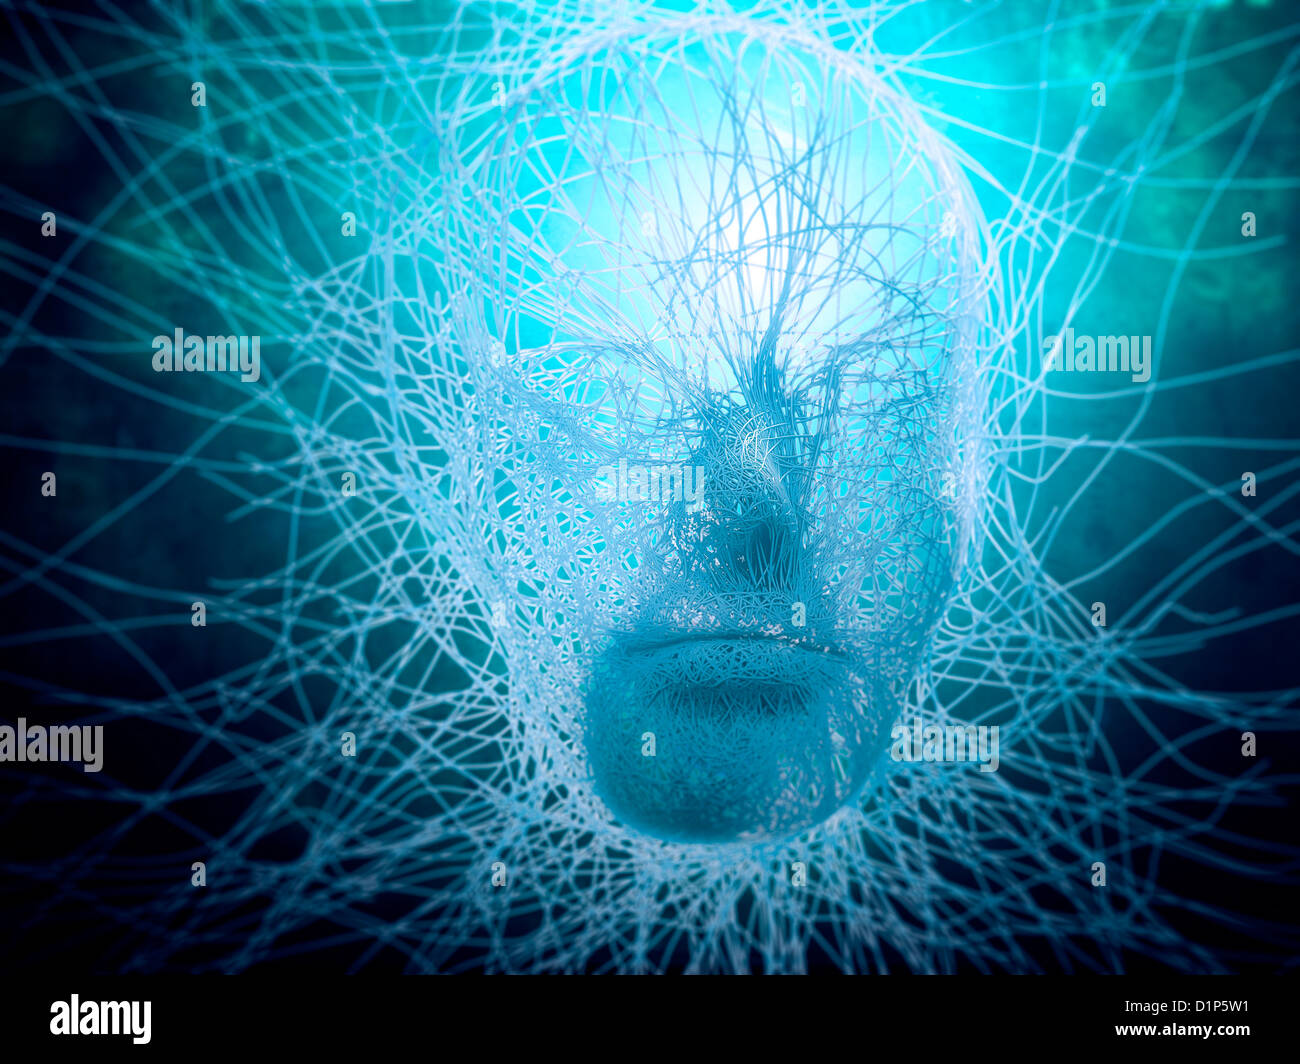 Artificial intelligence, conceptual image Stock Photo